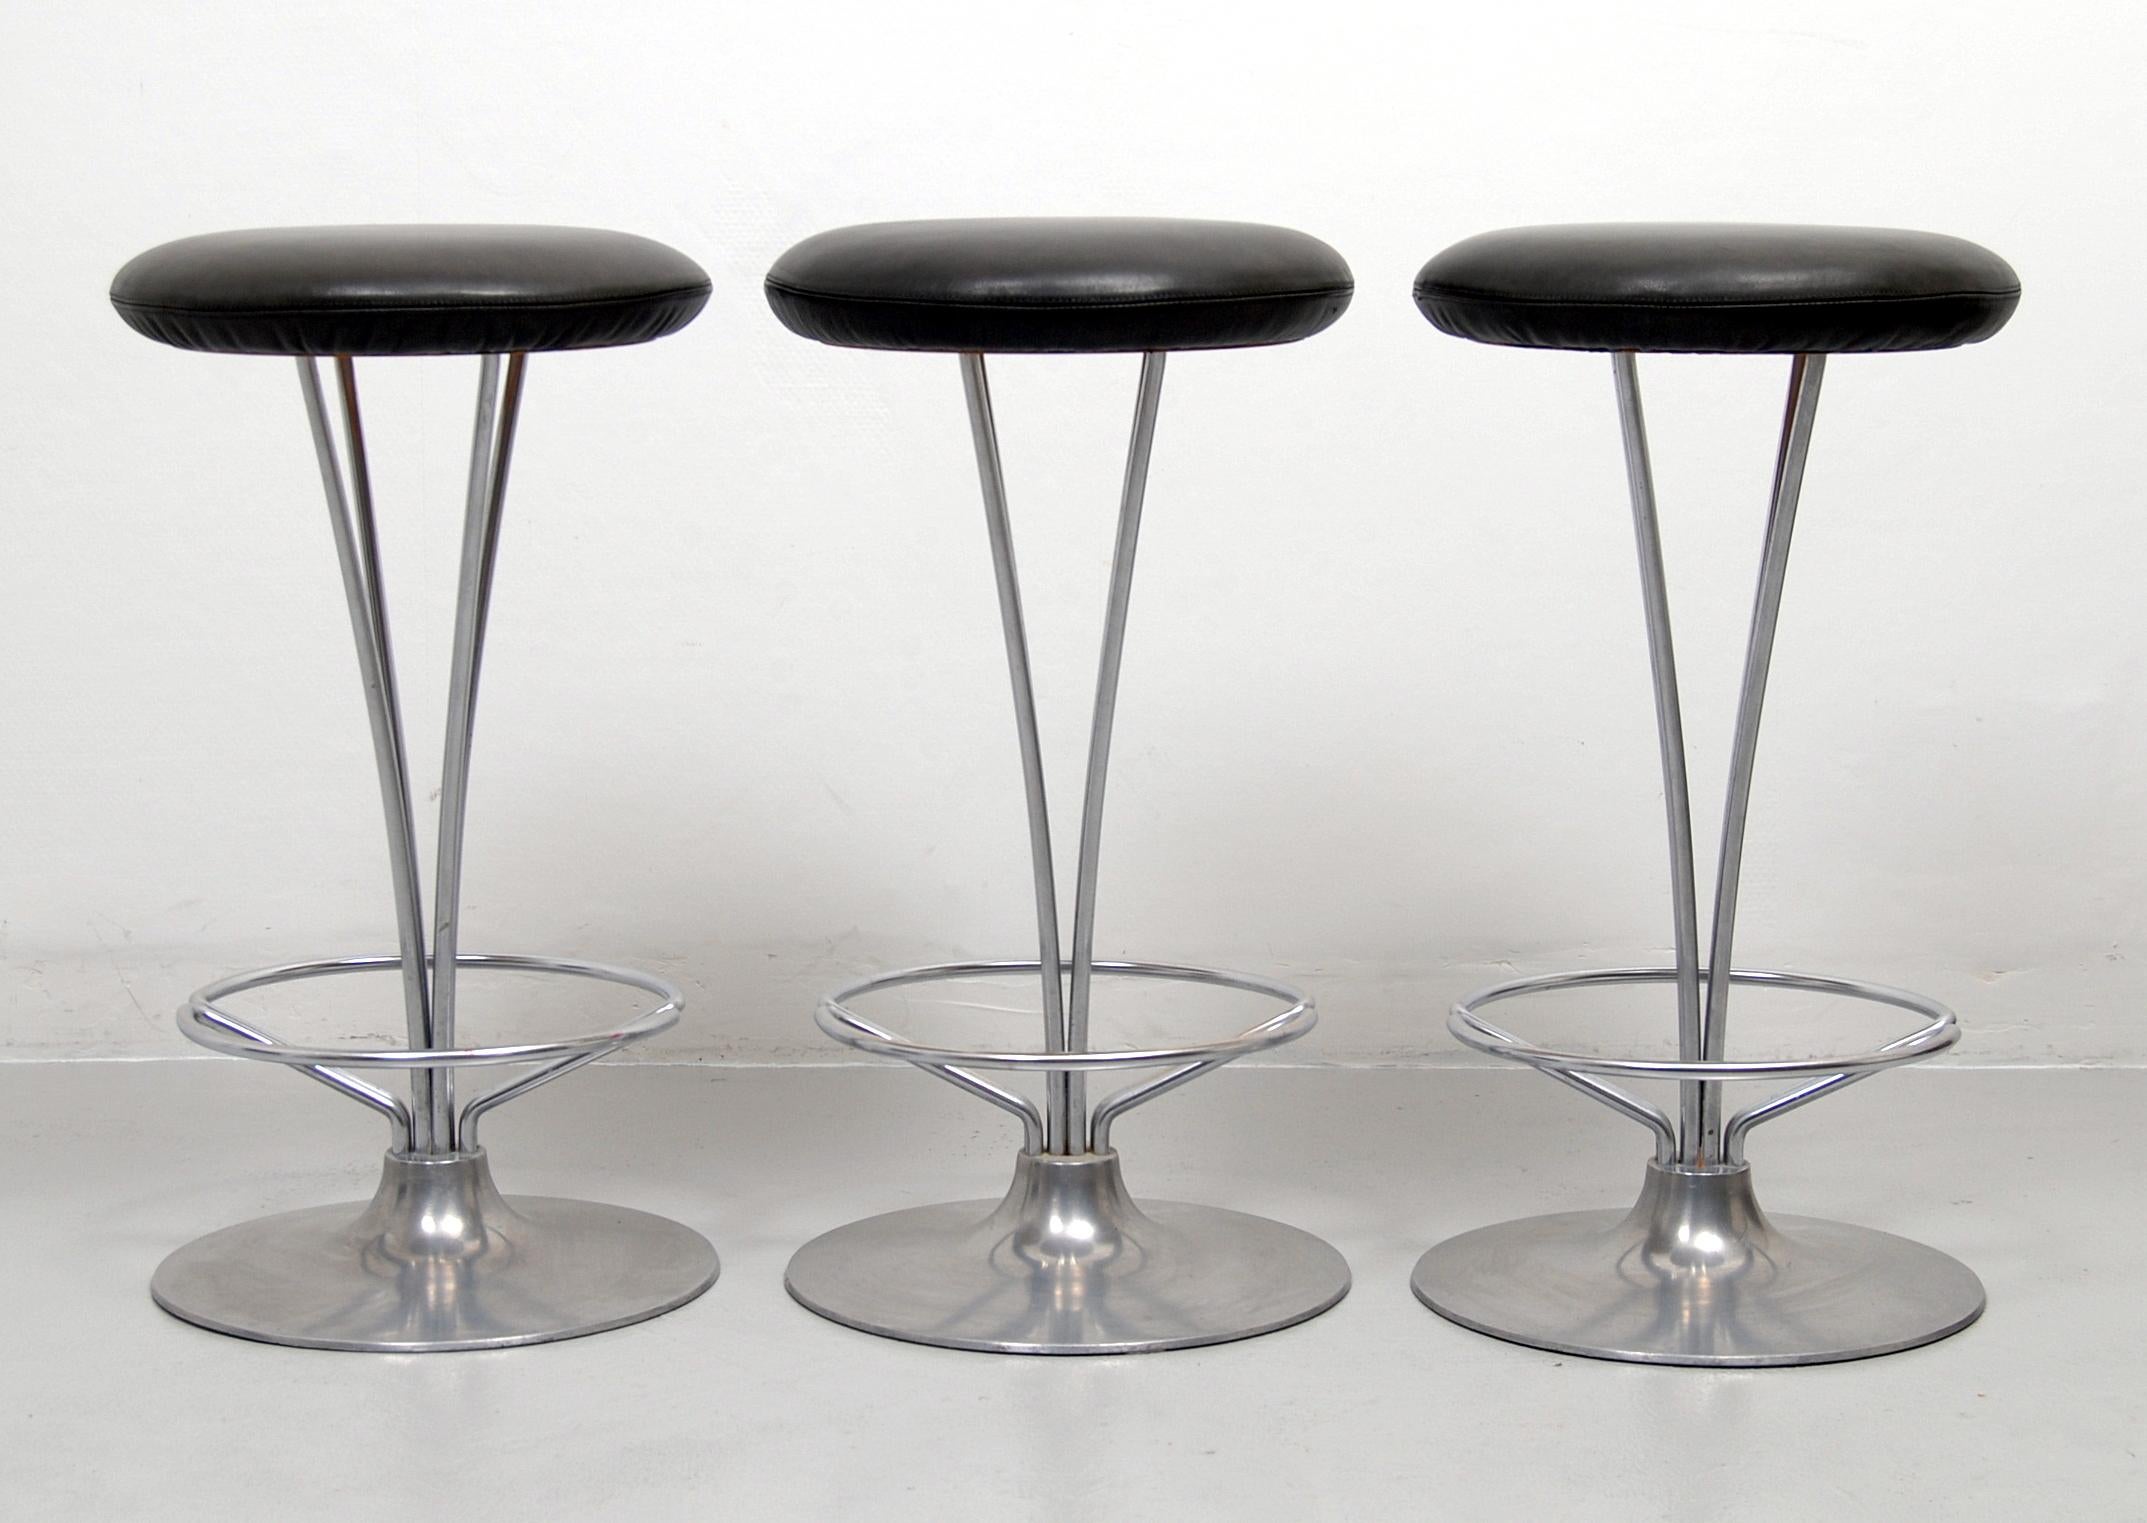 A set of three counter height / bar stools by Piet Hein for Fritz Hansen, Denmark. These stools have chrome-plated frames and a brushed aluminum base with new foam rubber and a light charcoal grey leather upholstery. All three labeled underneath;